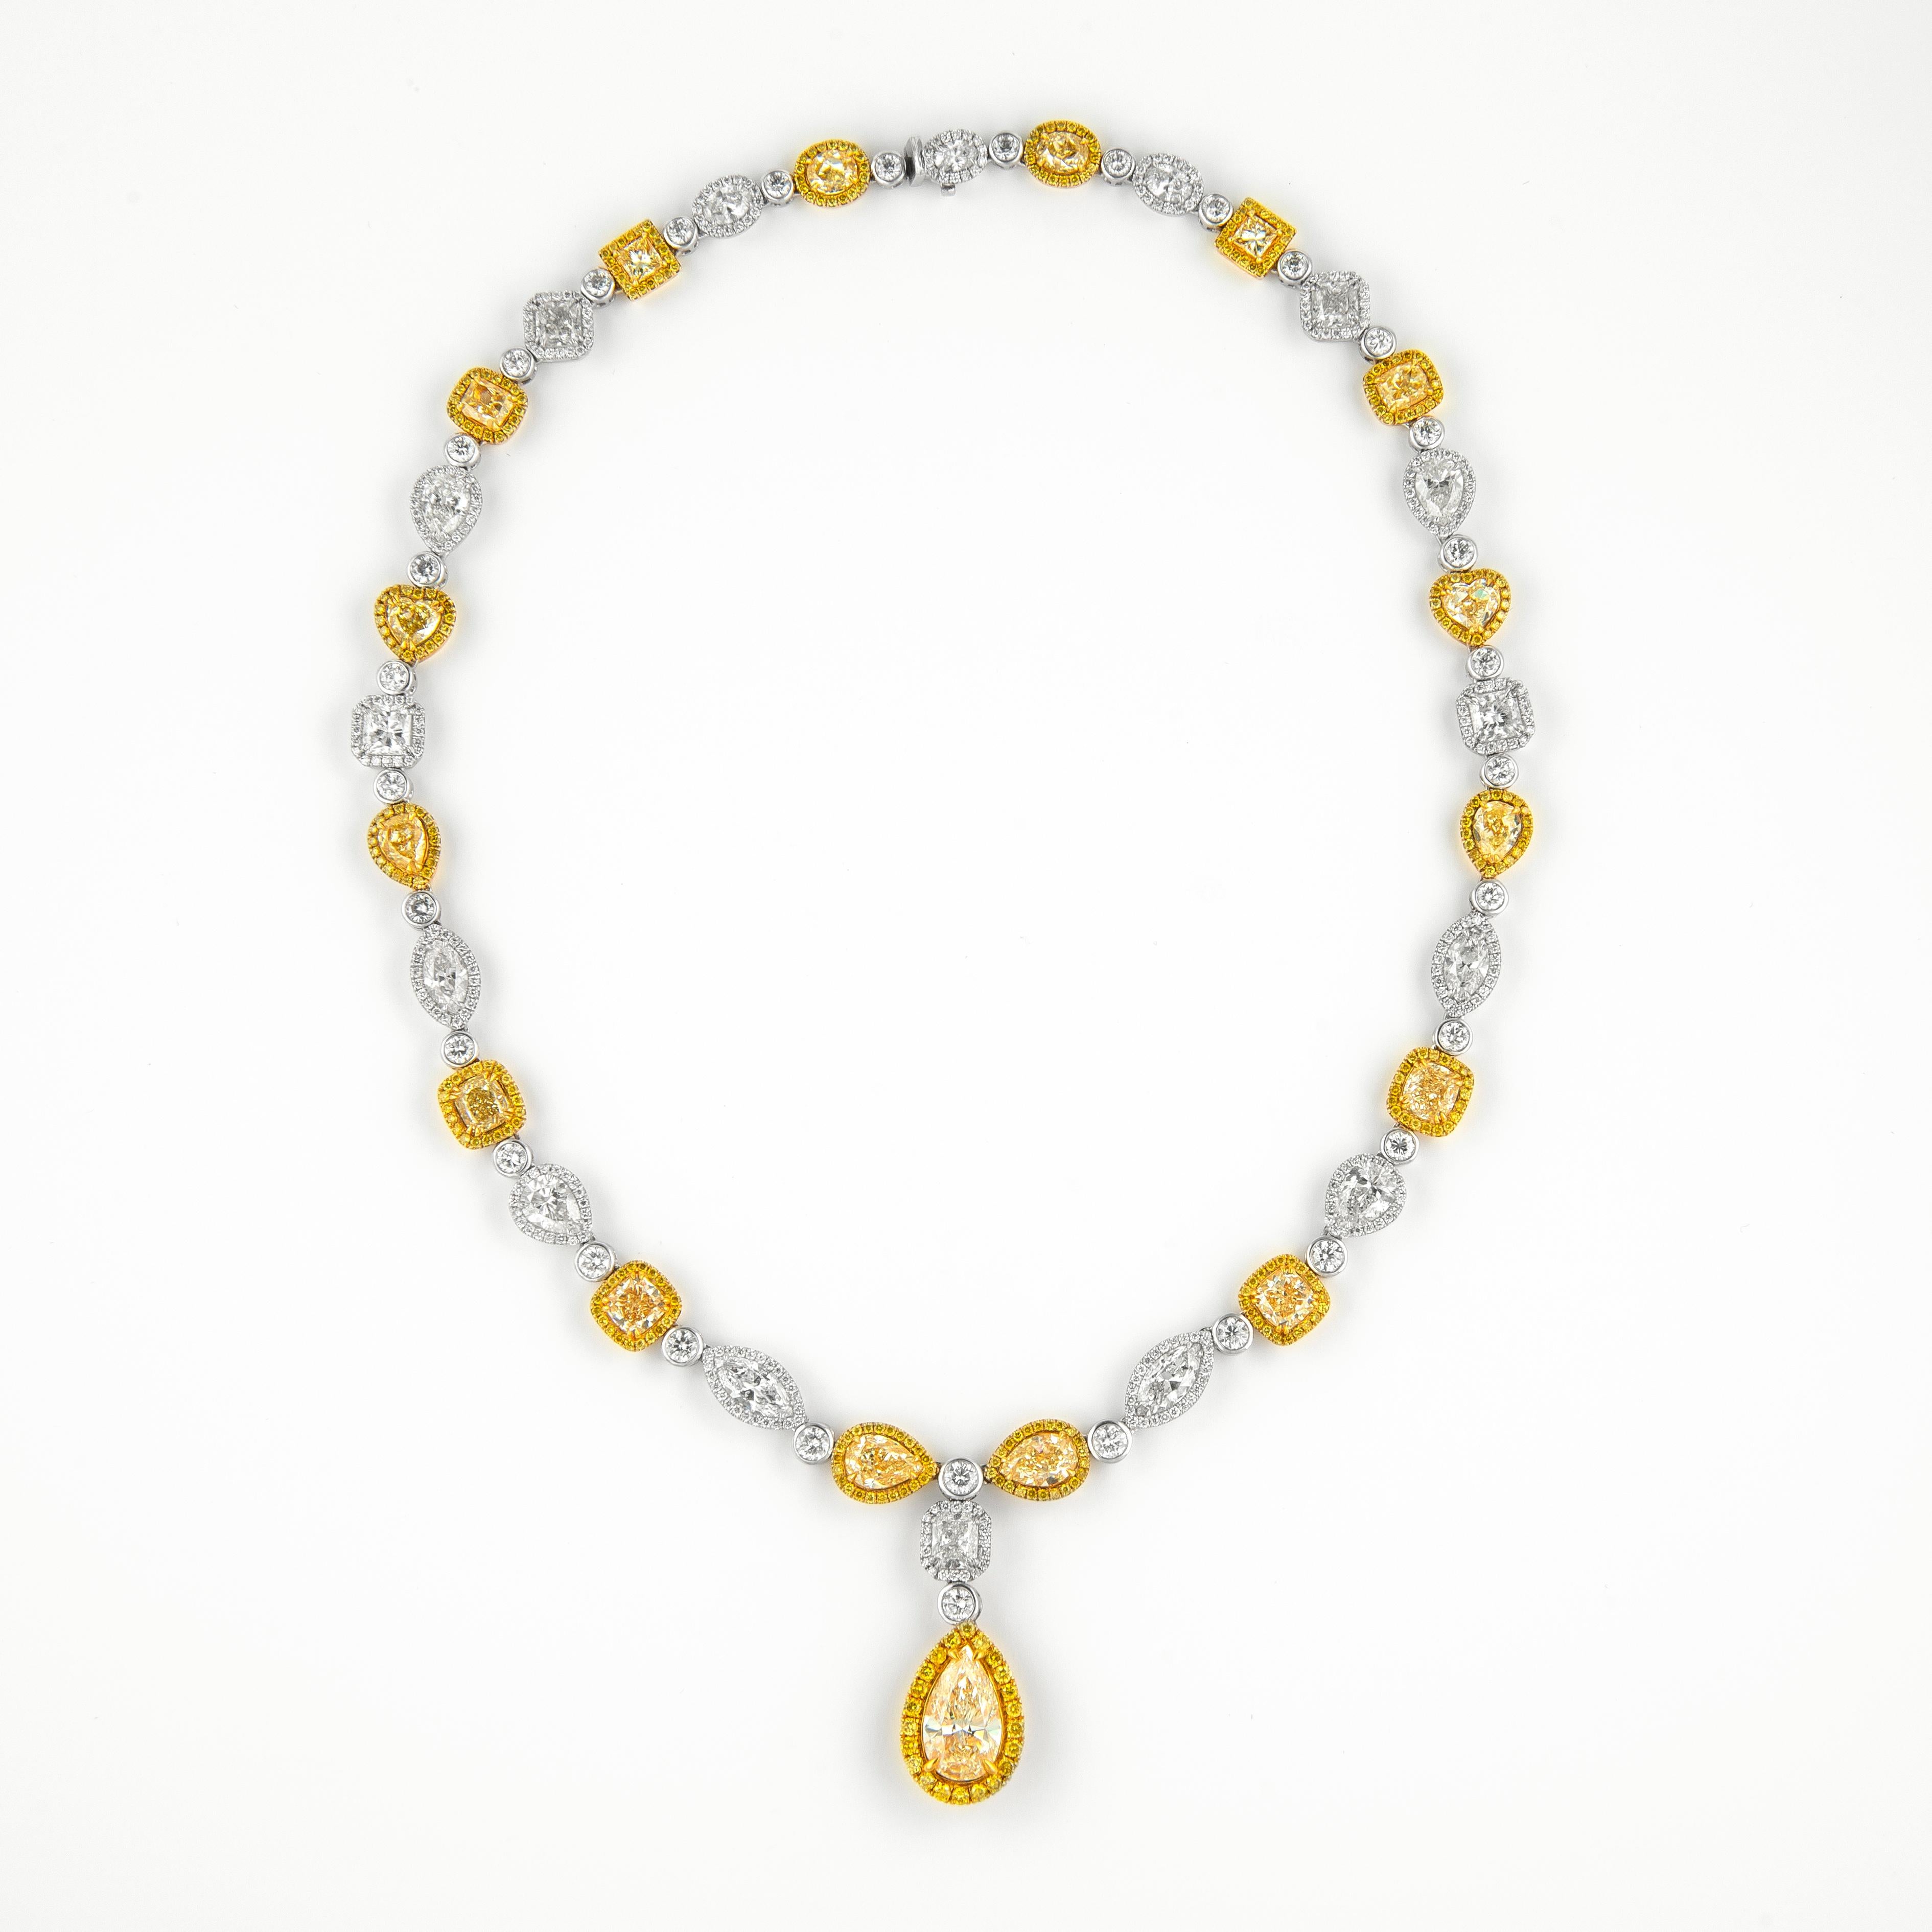 Impressive alternating yellow and white diamond drop necklace, most center stones GIA or EGL certified (20 total). High jewelry by Alexander Beverly Hills. 
49.89 carats total gemstone weight.
Center 5.01 carat pear shape diamond, Fancy Light Yellow